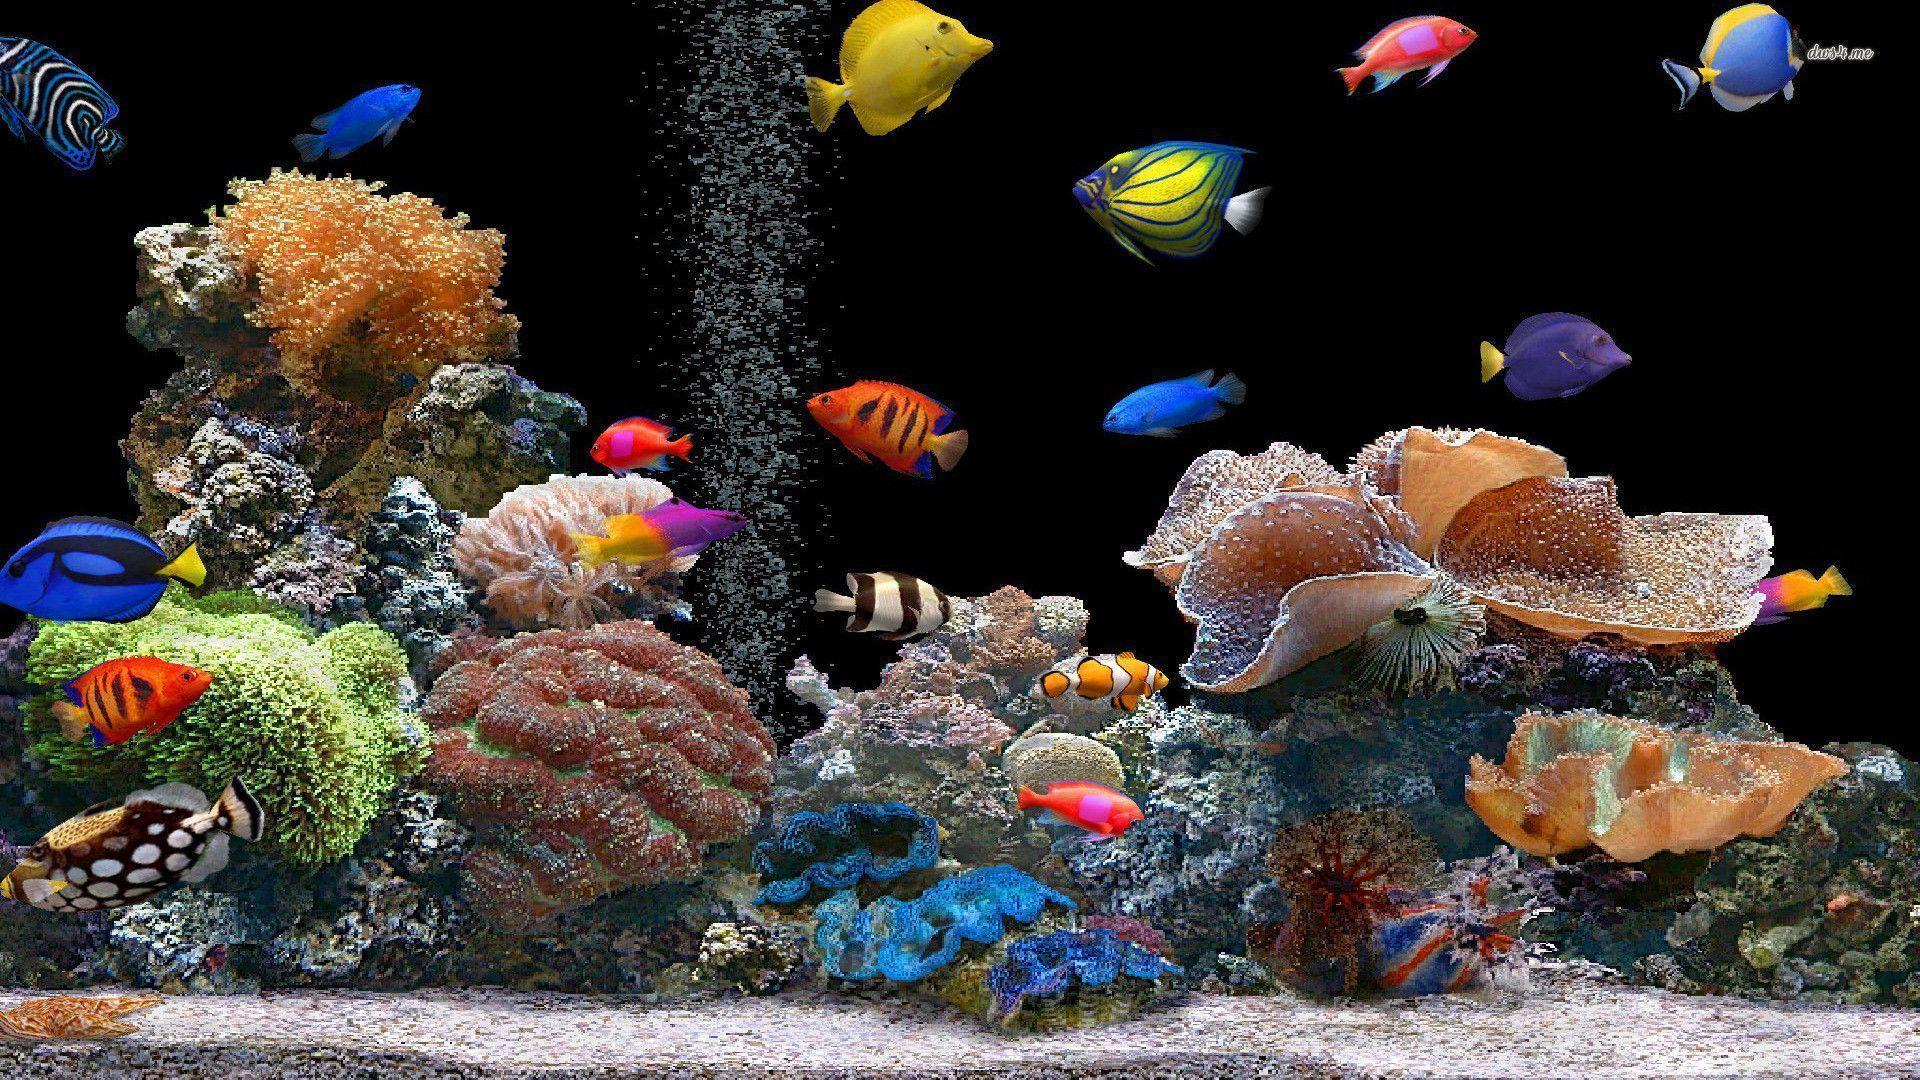 Colorful Fishes Wallpaper. Sky HD Wallpaper